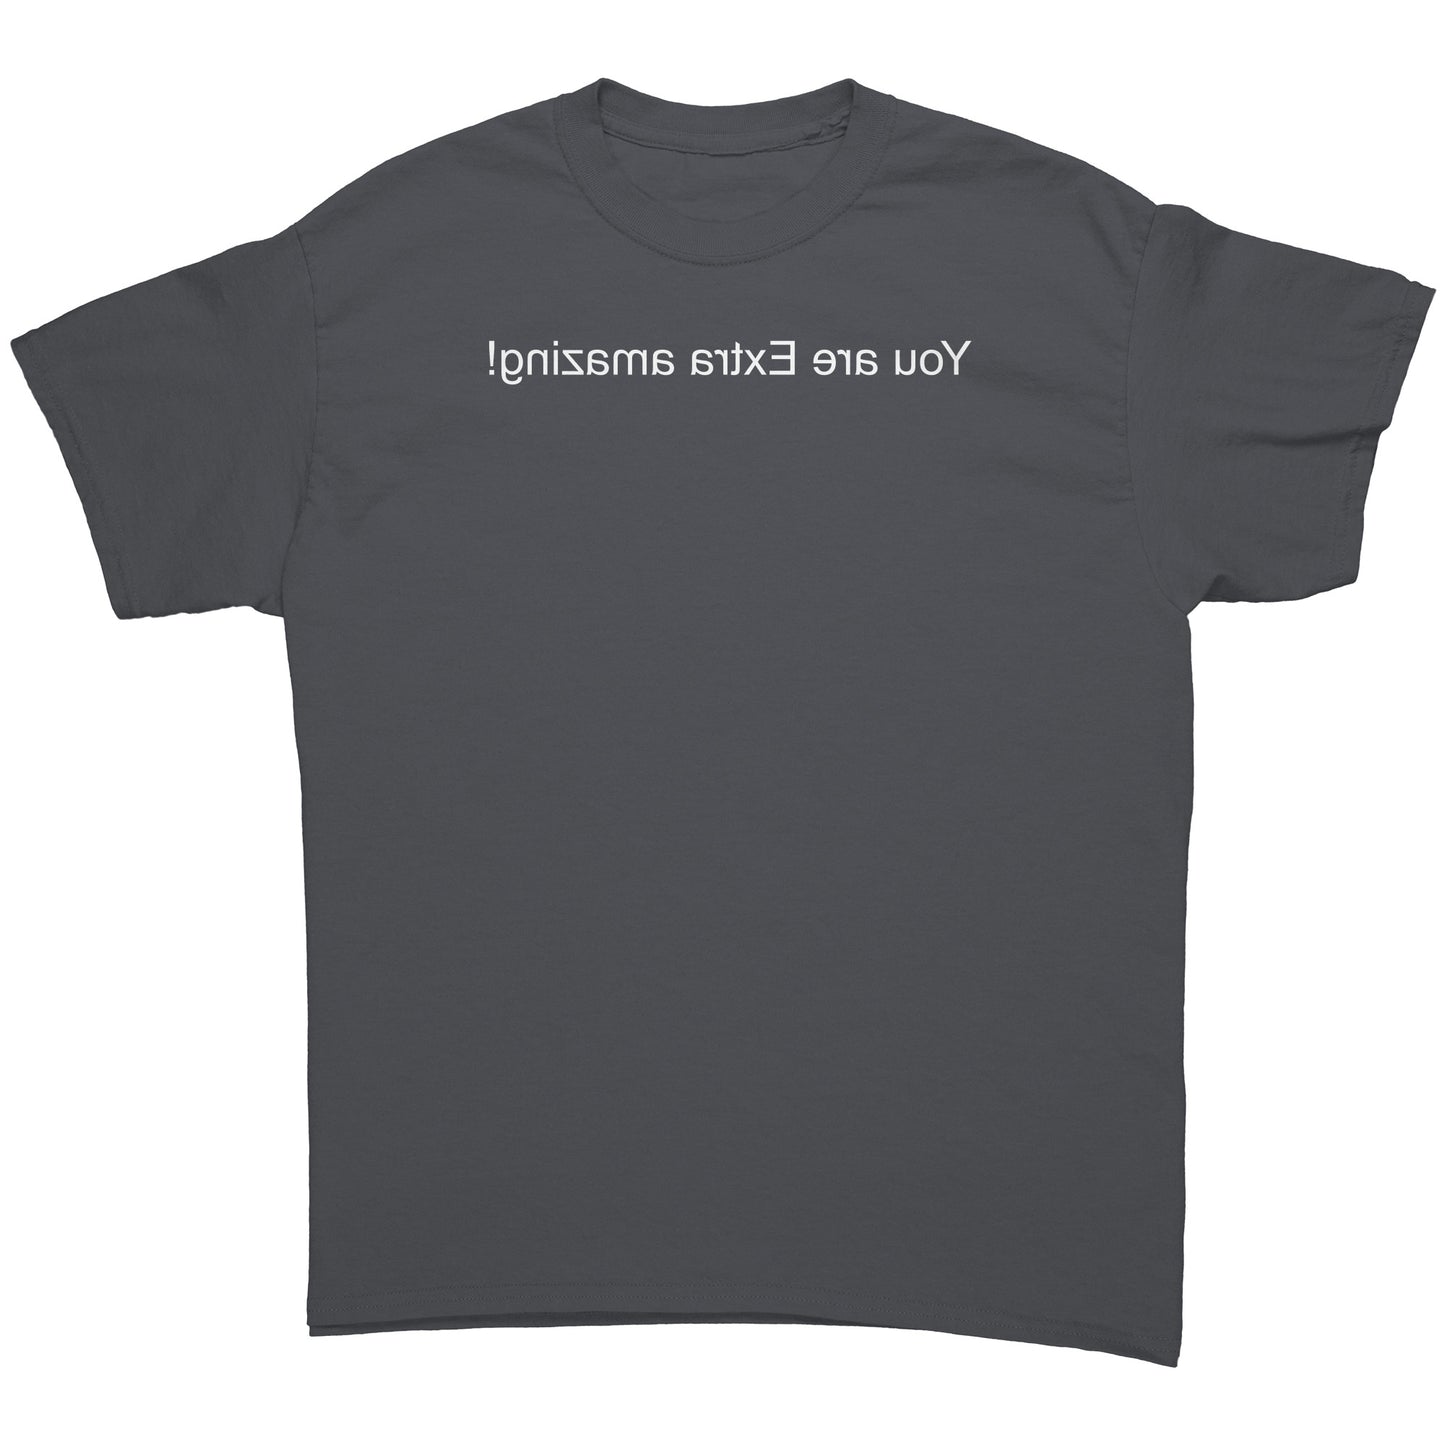 Extra Amazing Mirrored Men's Shirt With White Lettering